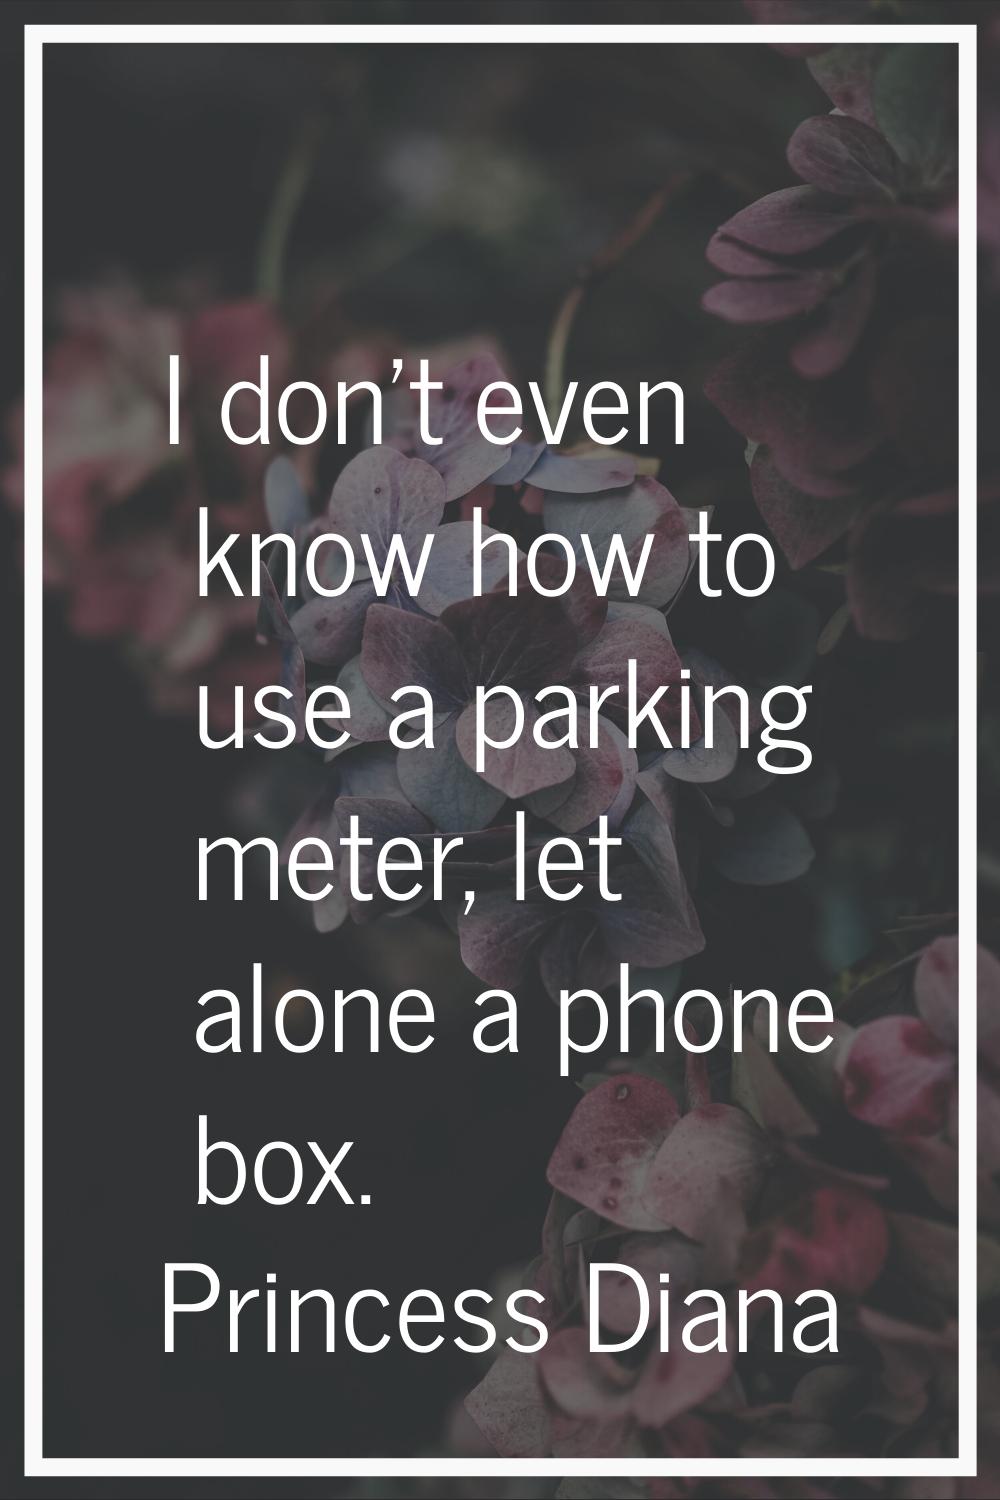 I don't even know how to use a parking meter, let alone a phone box.